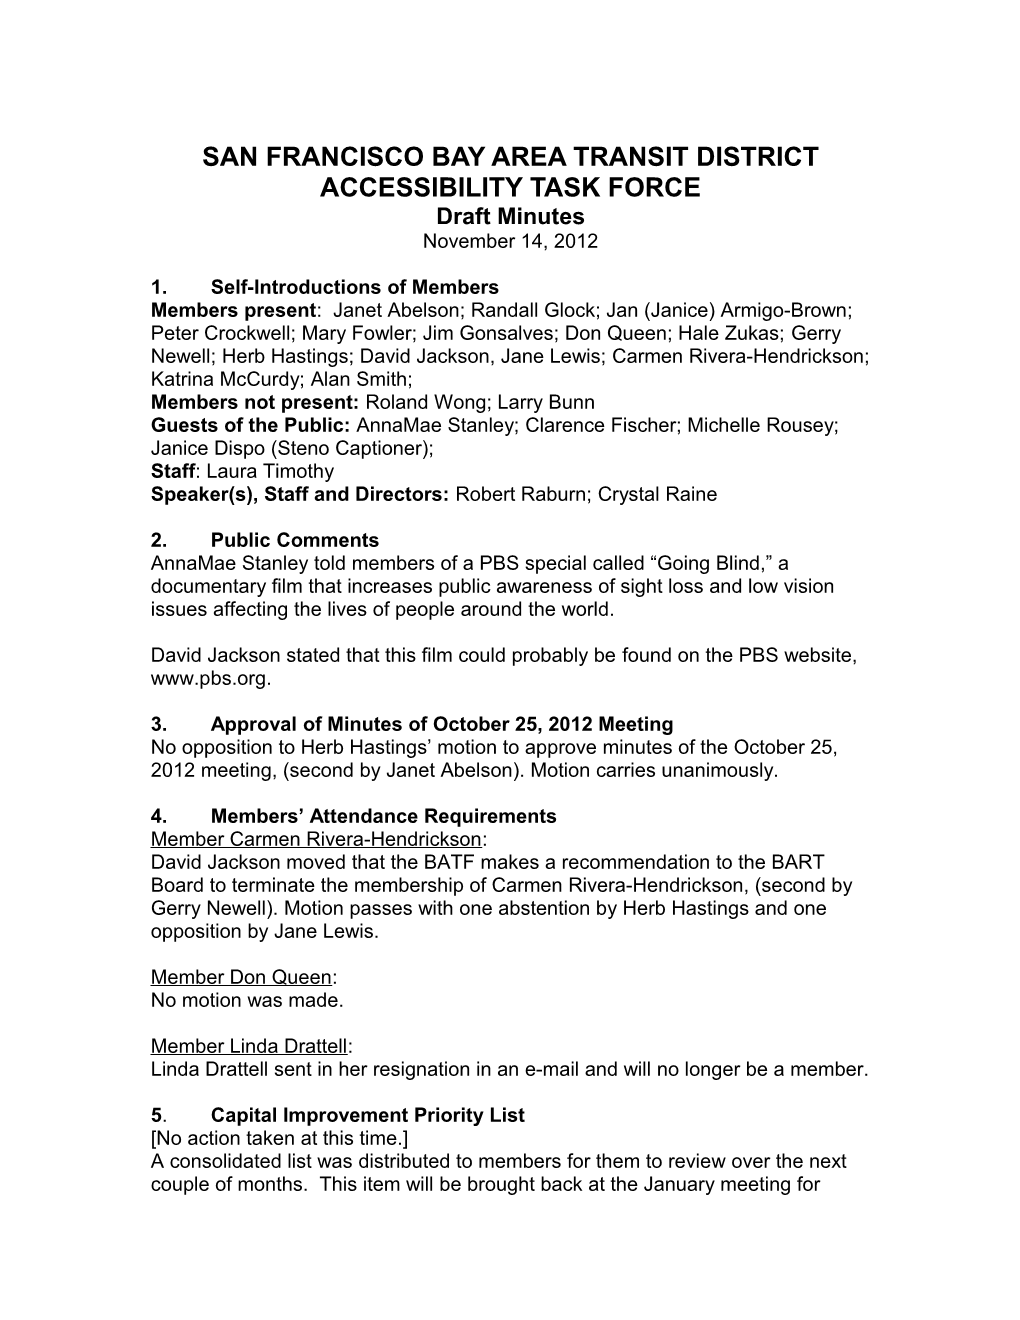 San Francisco Bay Area Transit District Accessibility Task Force